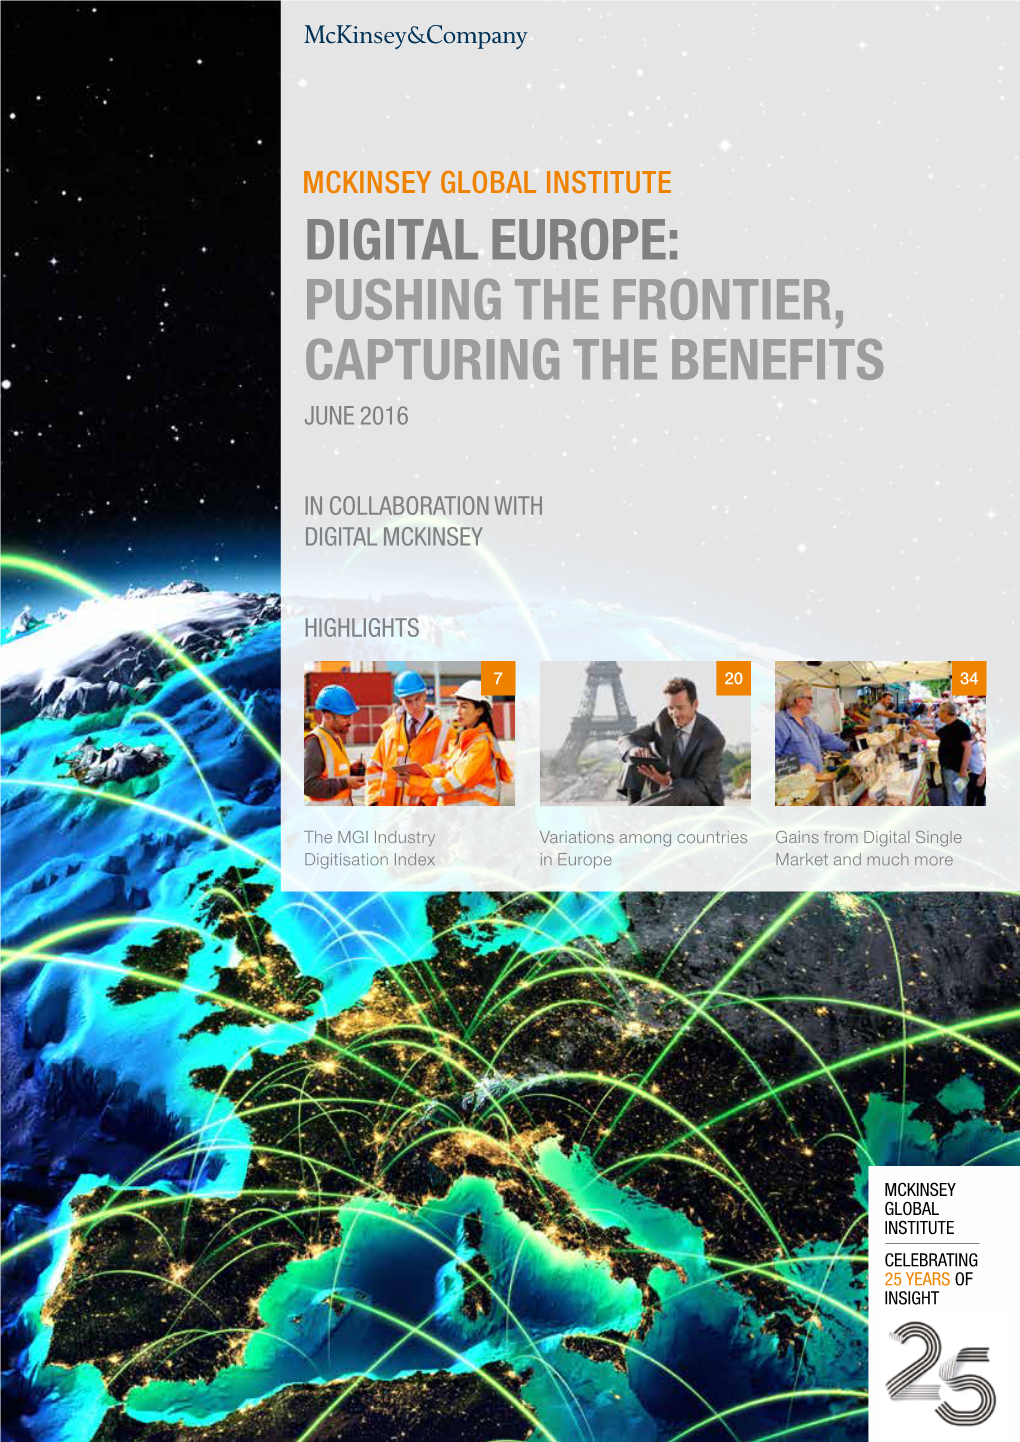 Digital Europe: Pushing the Frontier, Capturing the Benefits June 2016